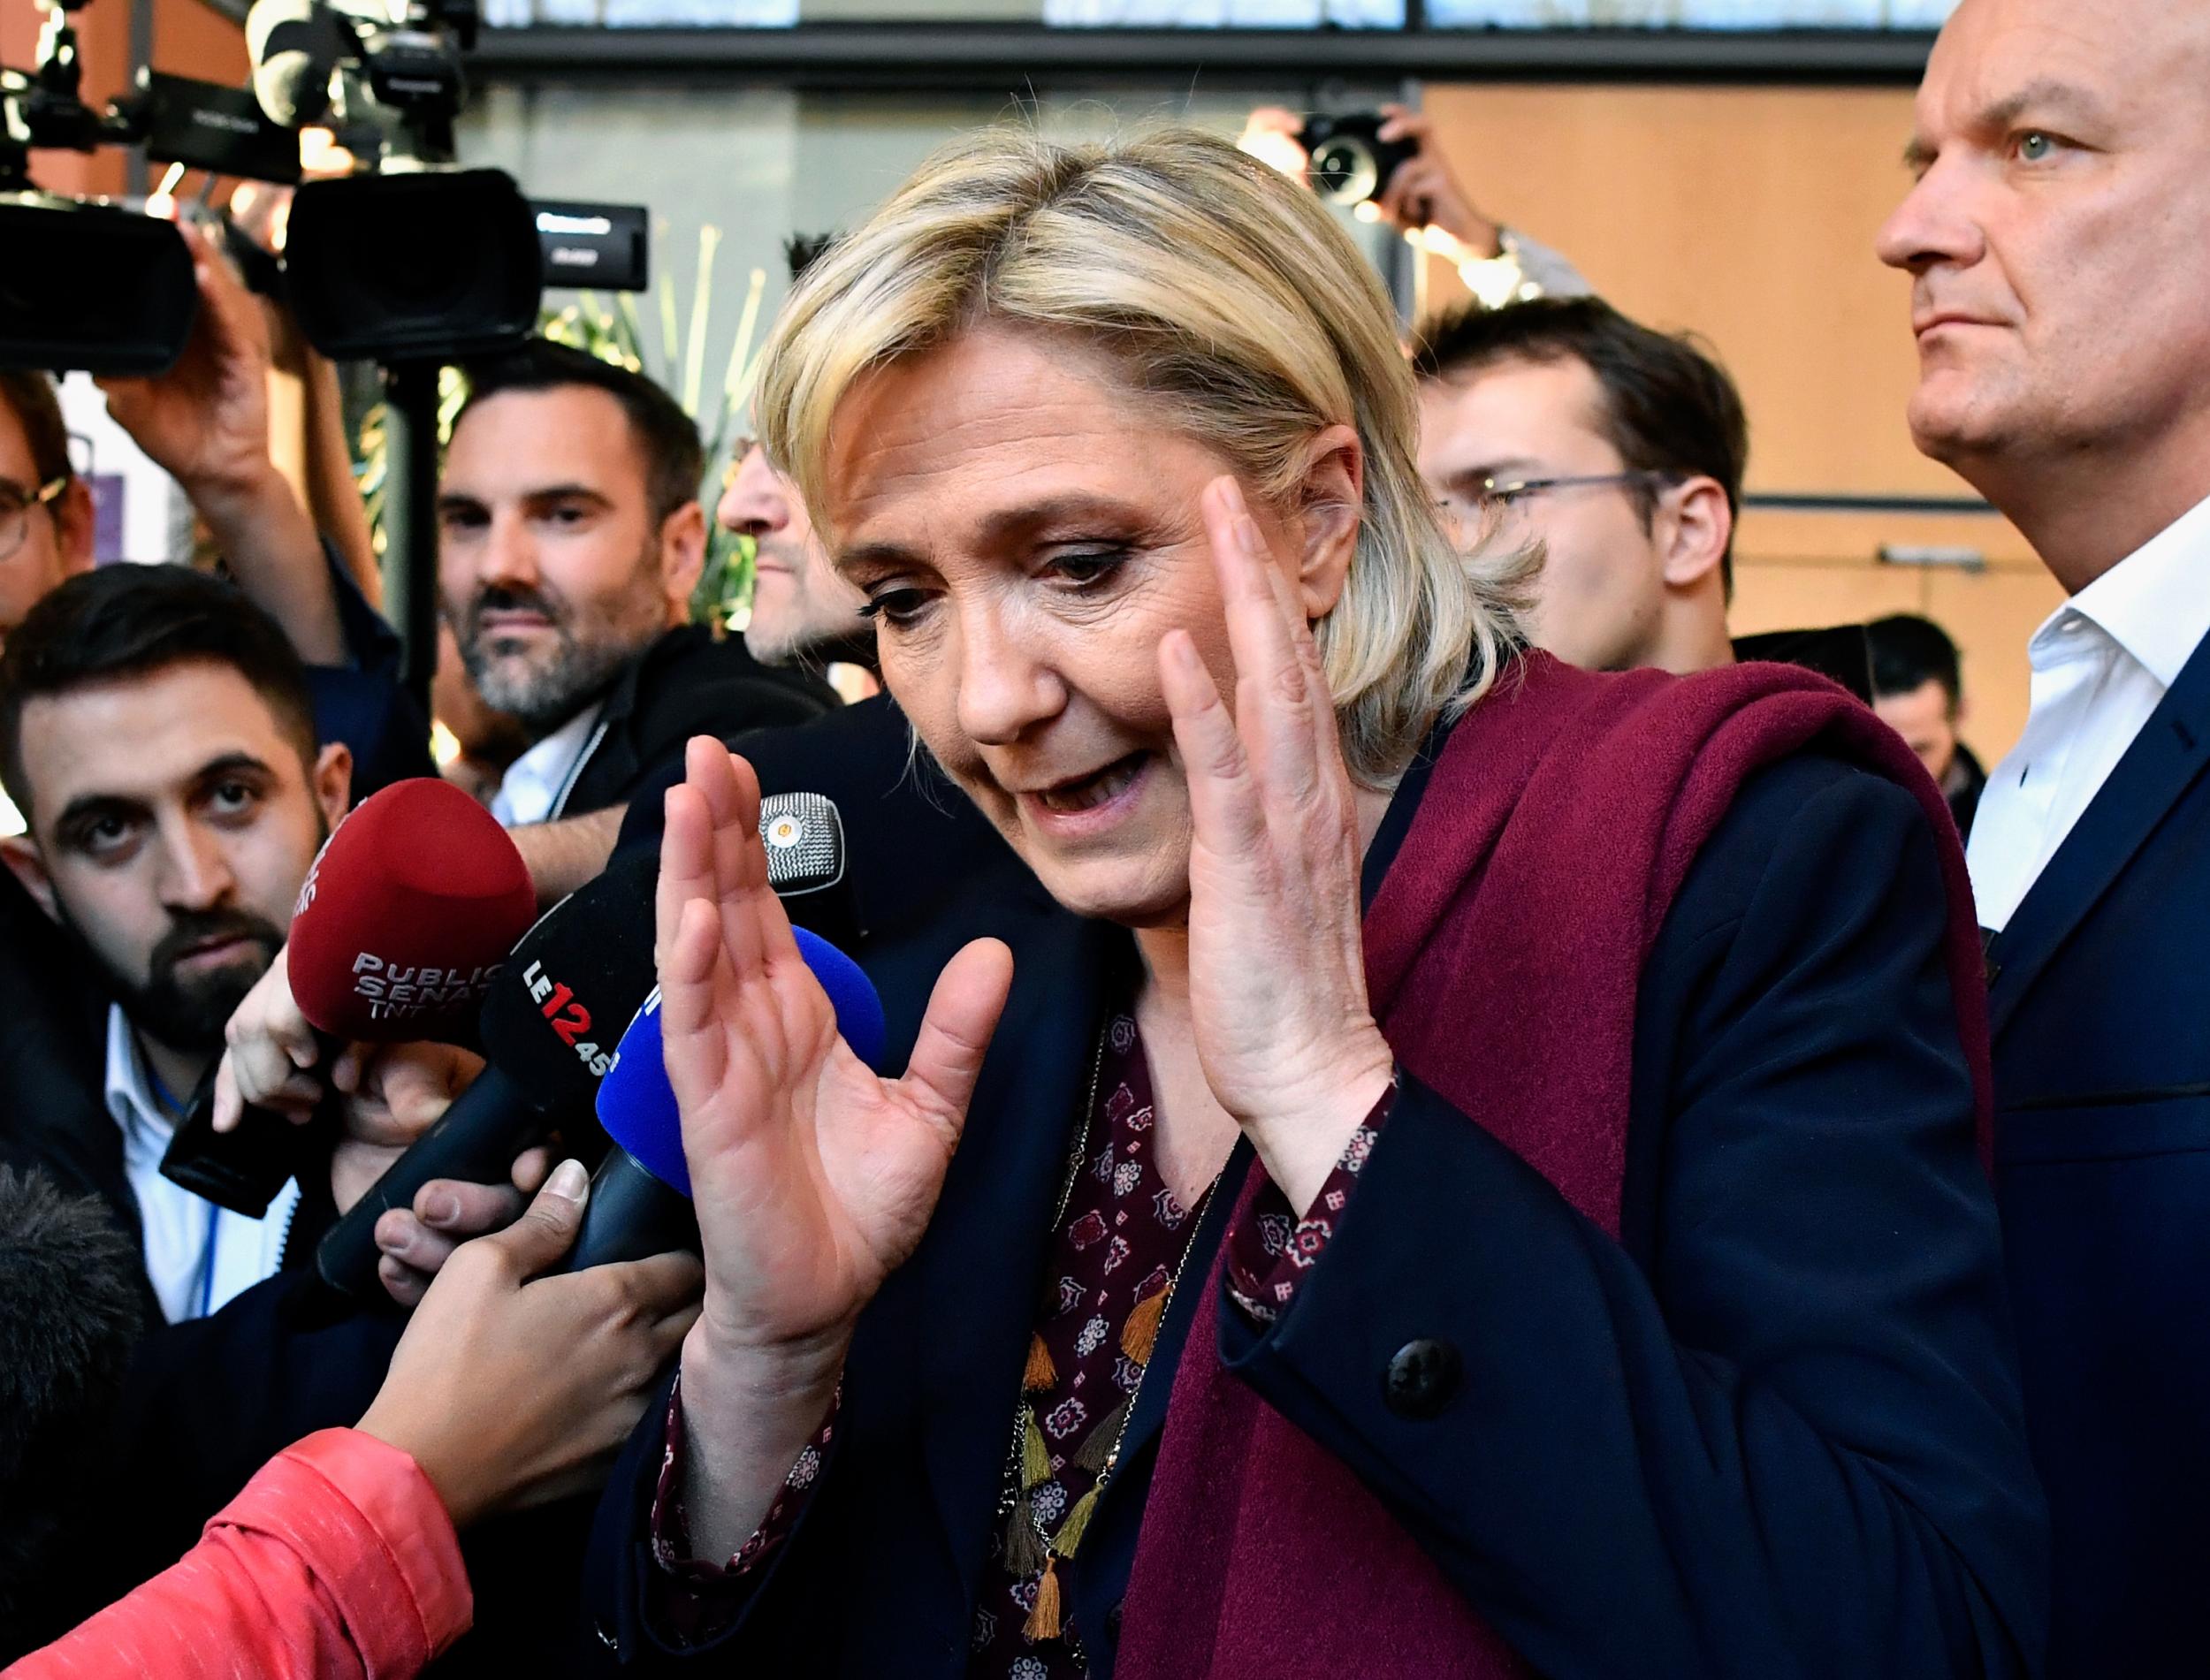 Ms Le Pen gave no detail and did not say why she believed one such group was responsible for the attack